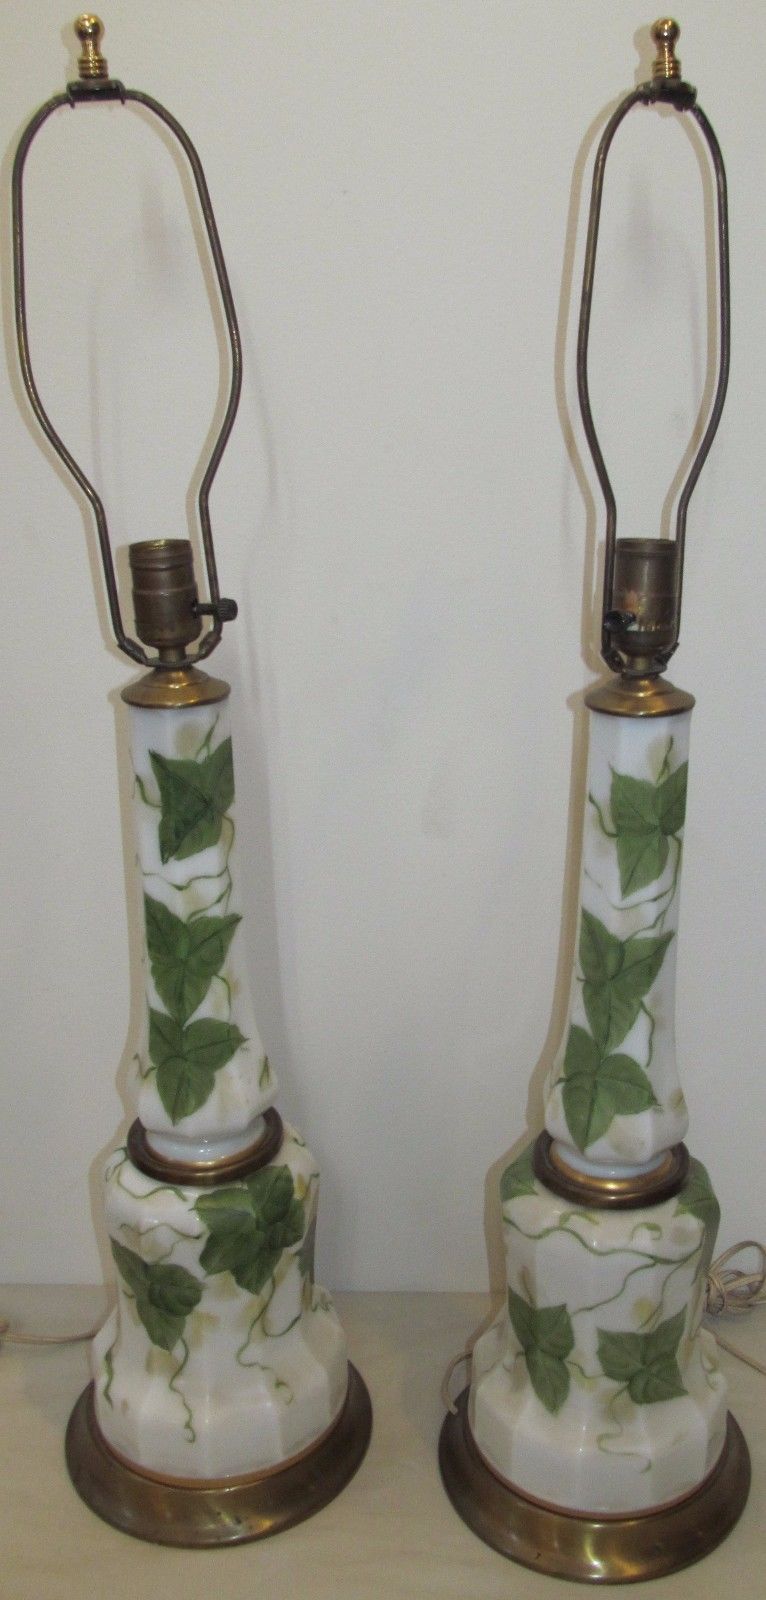 PAIR OF 1930'S FINE BRISTOL GLASS HAND PAINTED LAMPS ARTIST SIGNED 